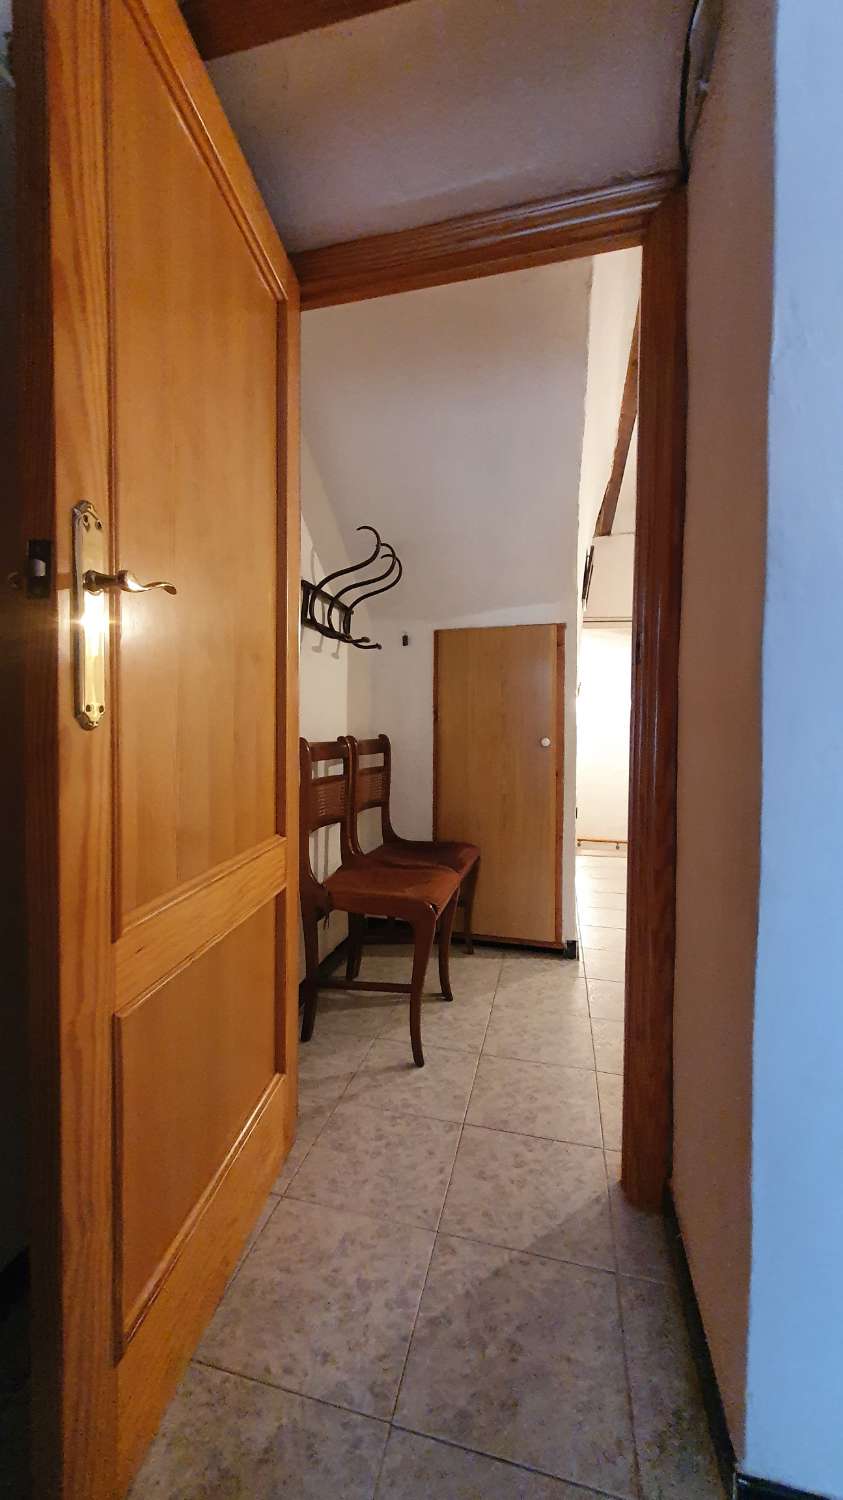 House for sale in Villalonga